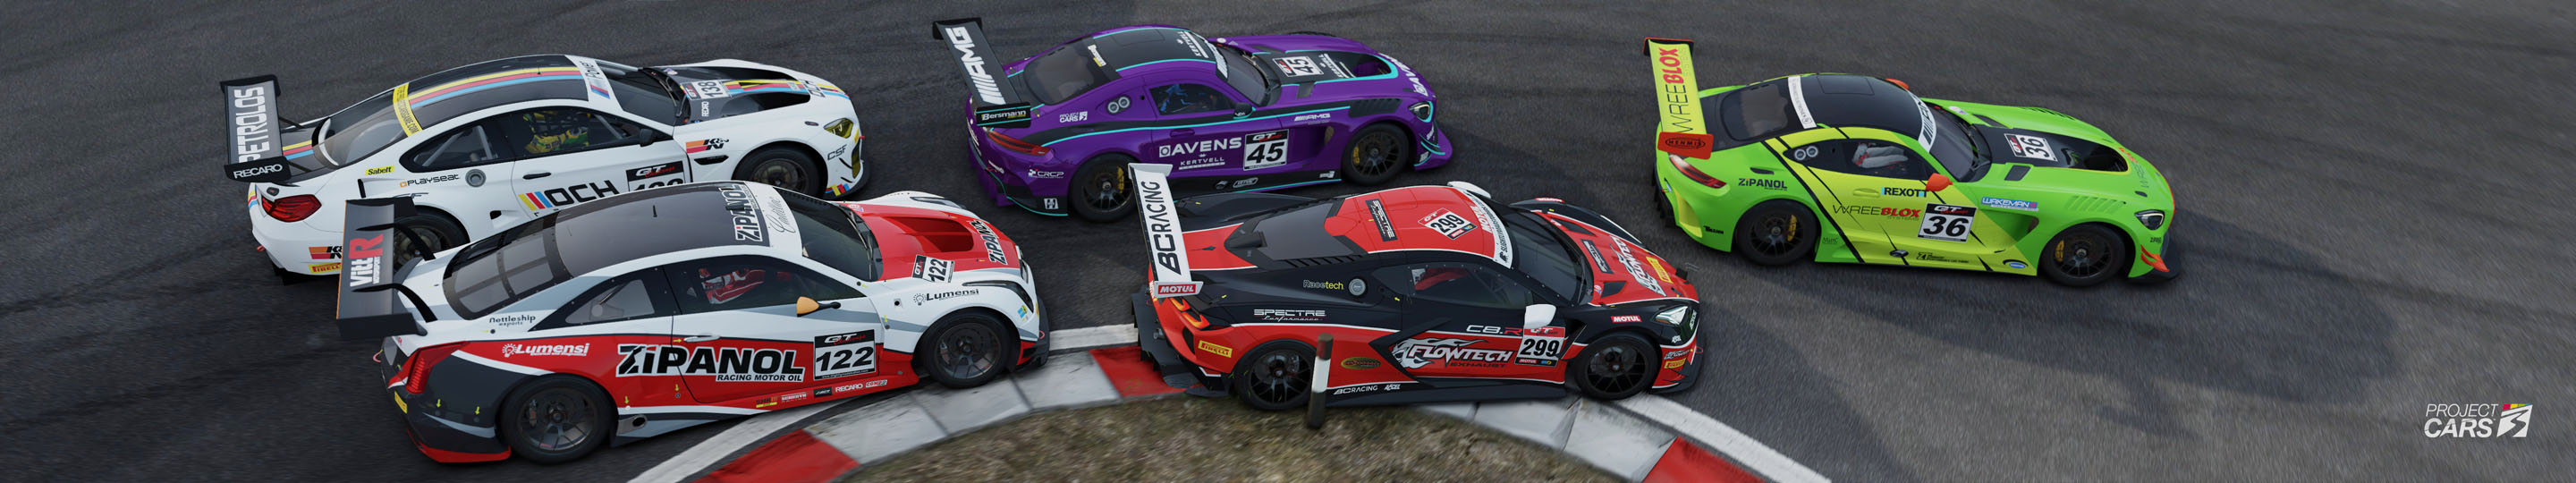 5 PROJECT CARS 3 GT3 at NORDSCHLEIFE copy.jpg